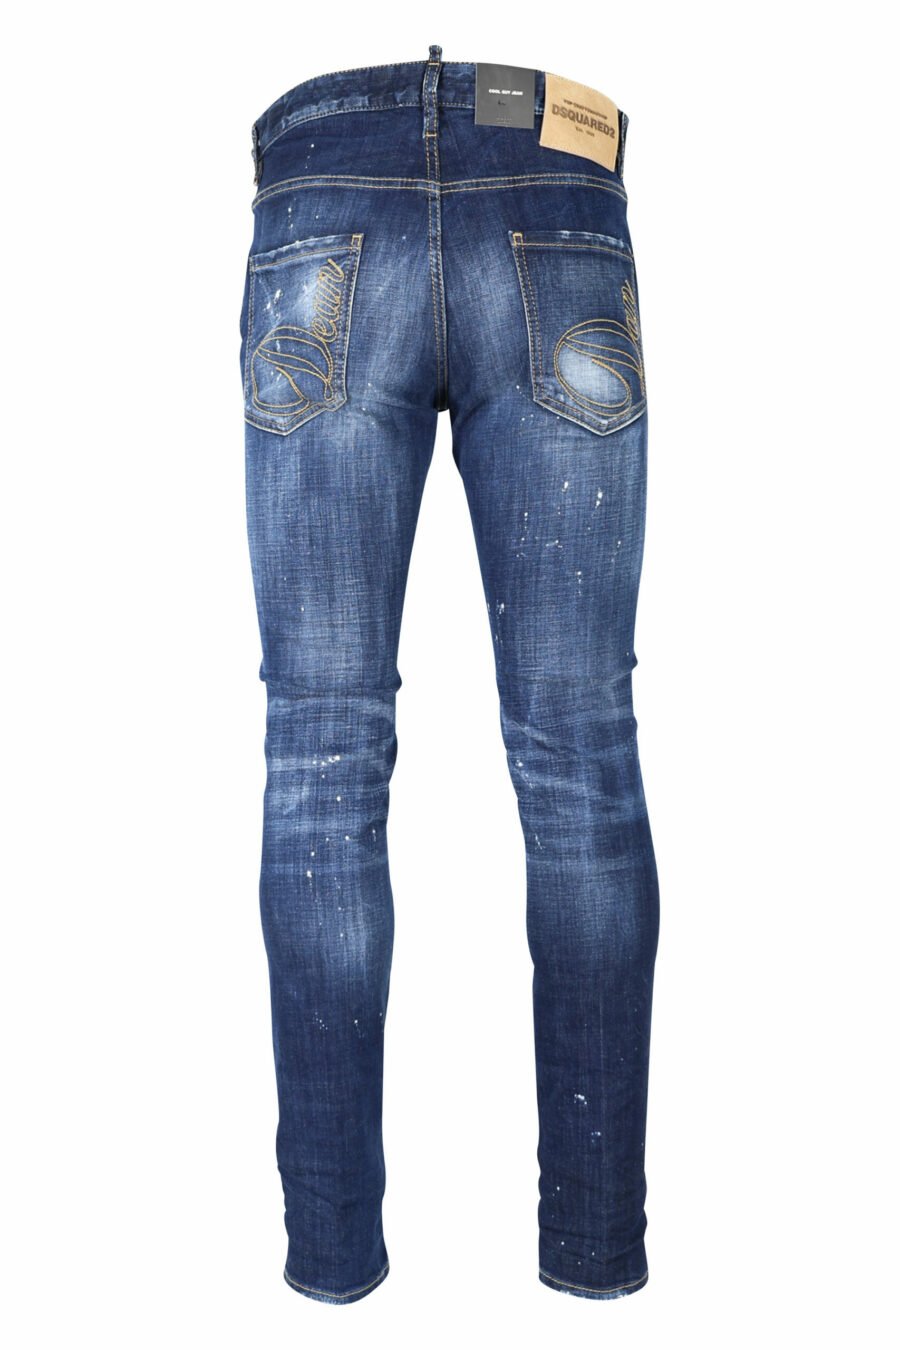 Blue "cool guy jean" jeans with paint and frayed - 8054148101688 2 scaled